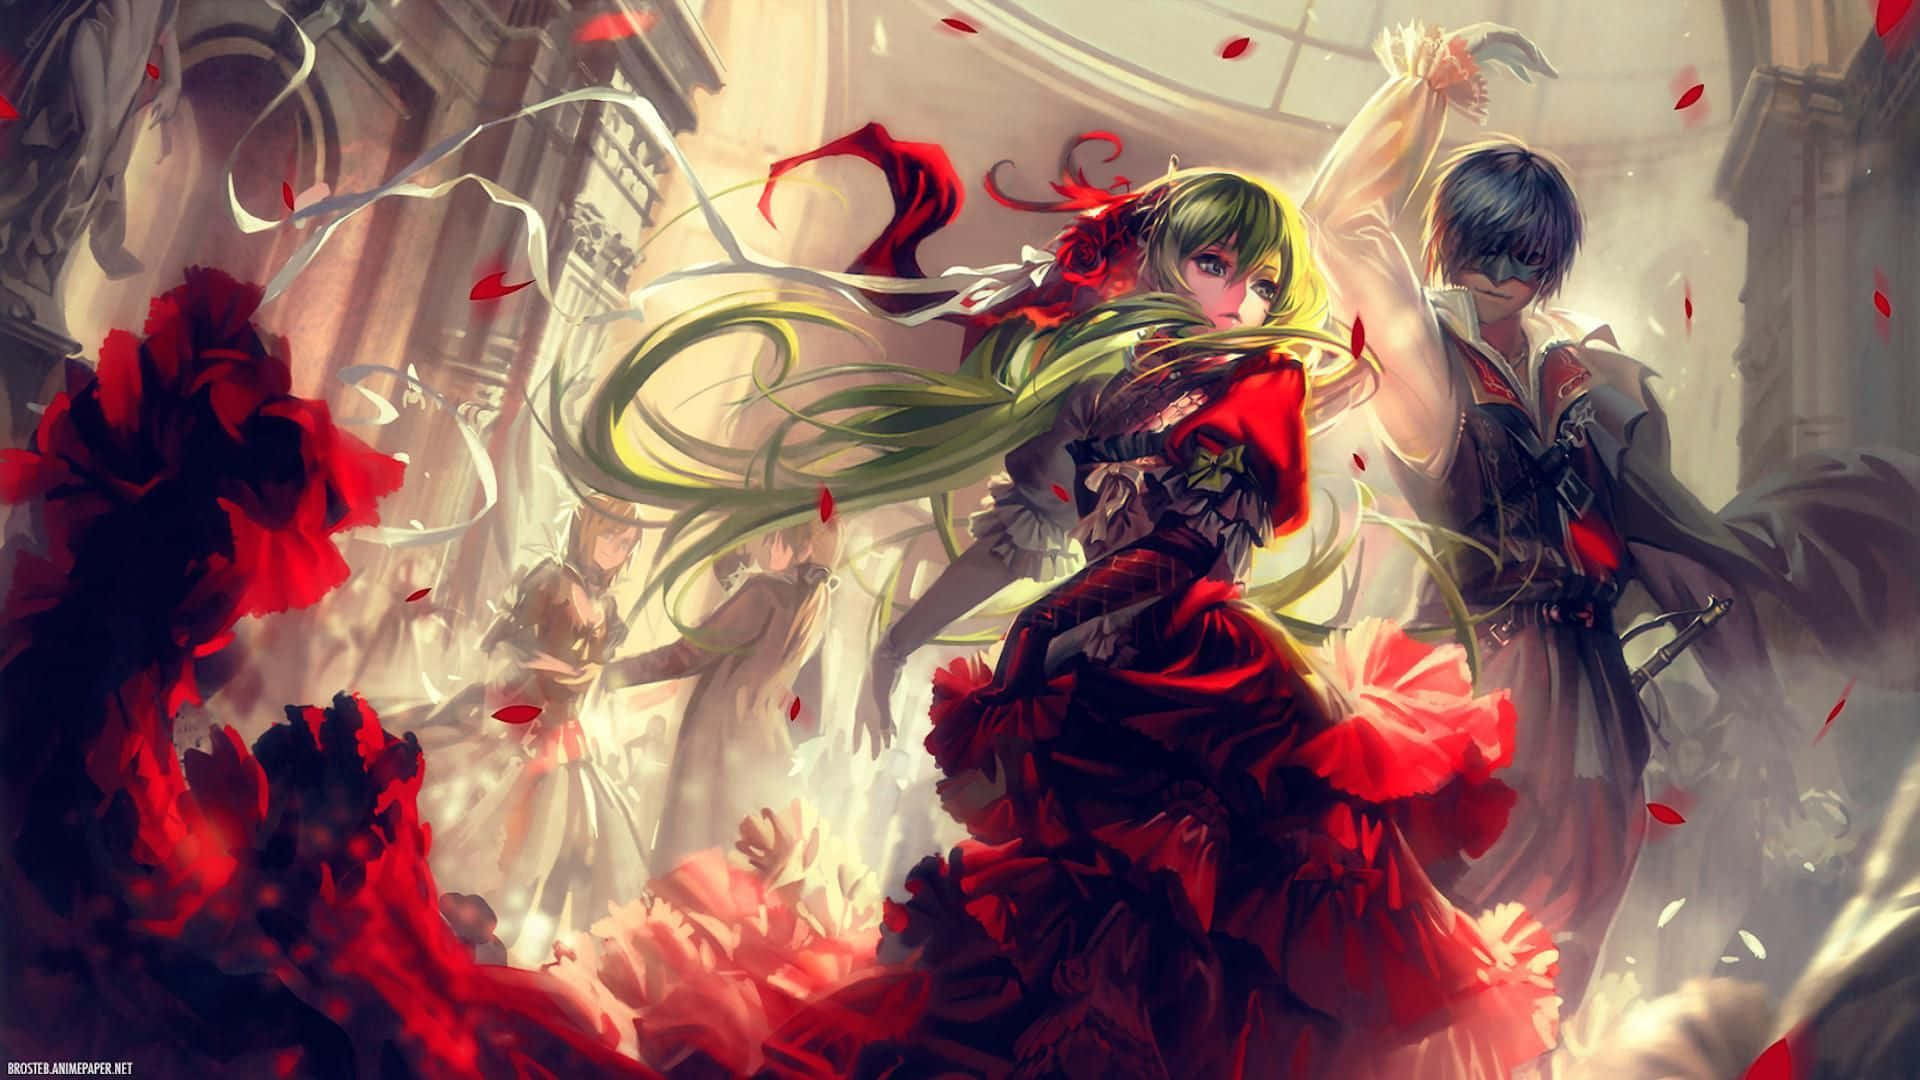 Anime Aesthetic Pfp Of Gumi And Kaito Wallpaper